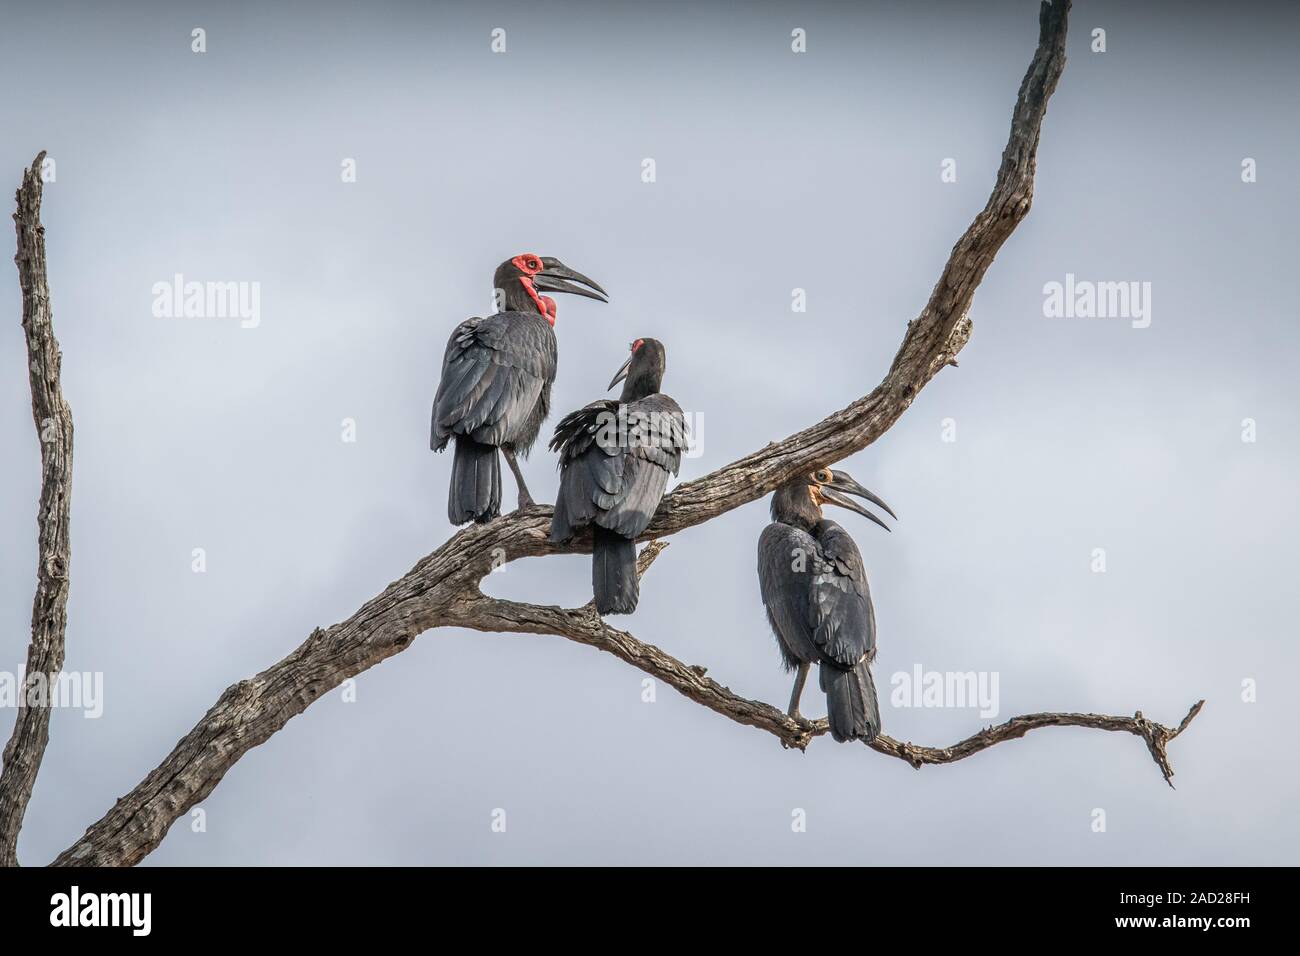 Three Southern ground hornbills in a tree. Stock Photo